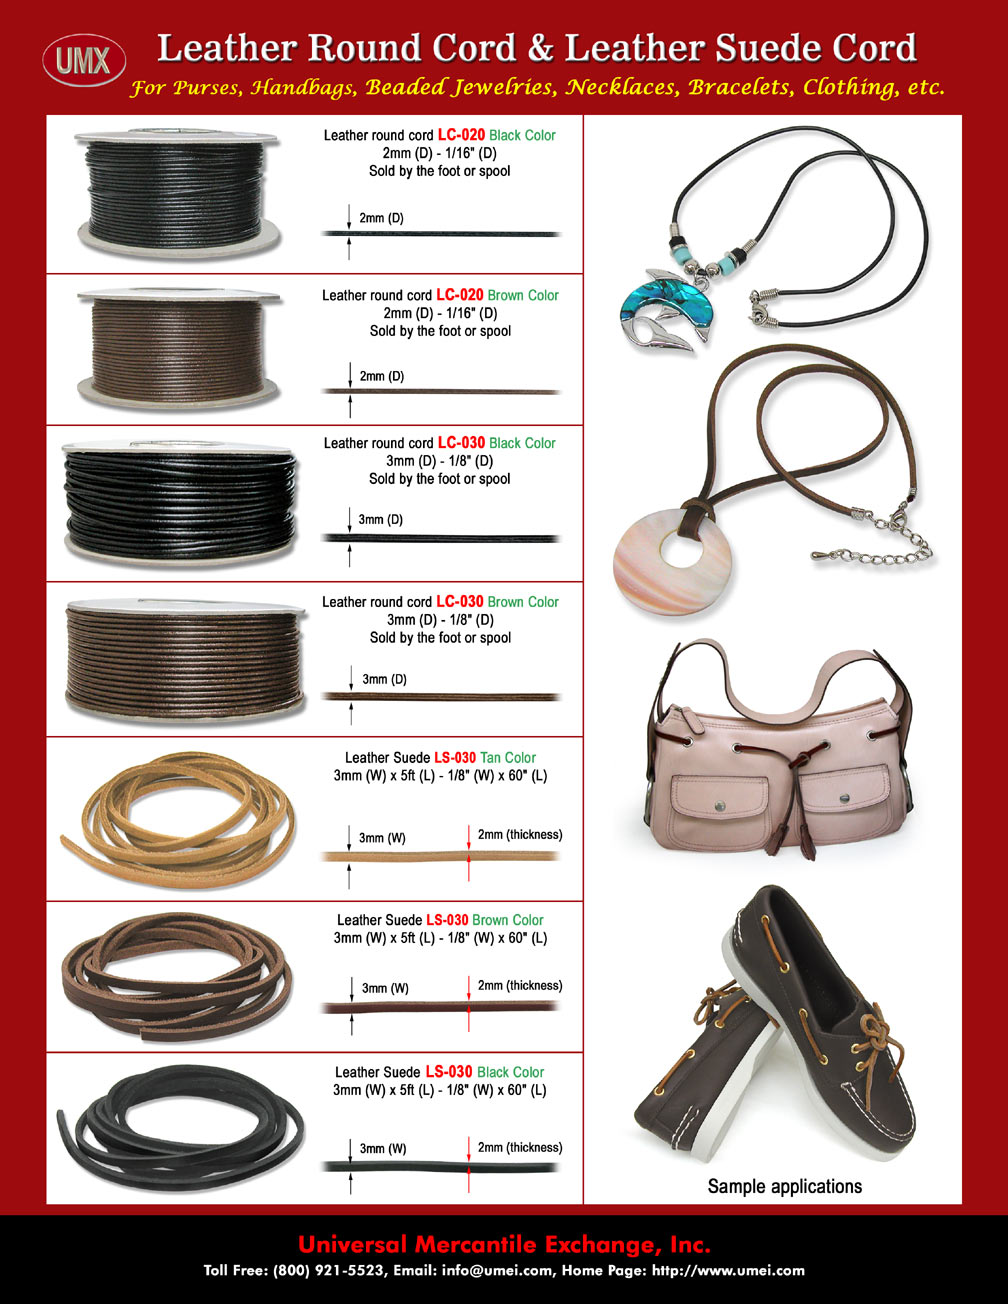 Leather Cord Supplies: Round Leather Cords and Leather Suede for Purse Crafts and Handbag Craft Making